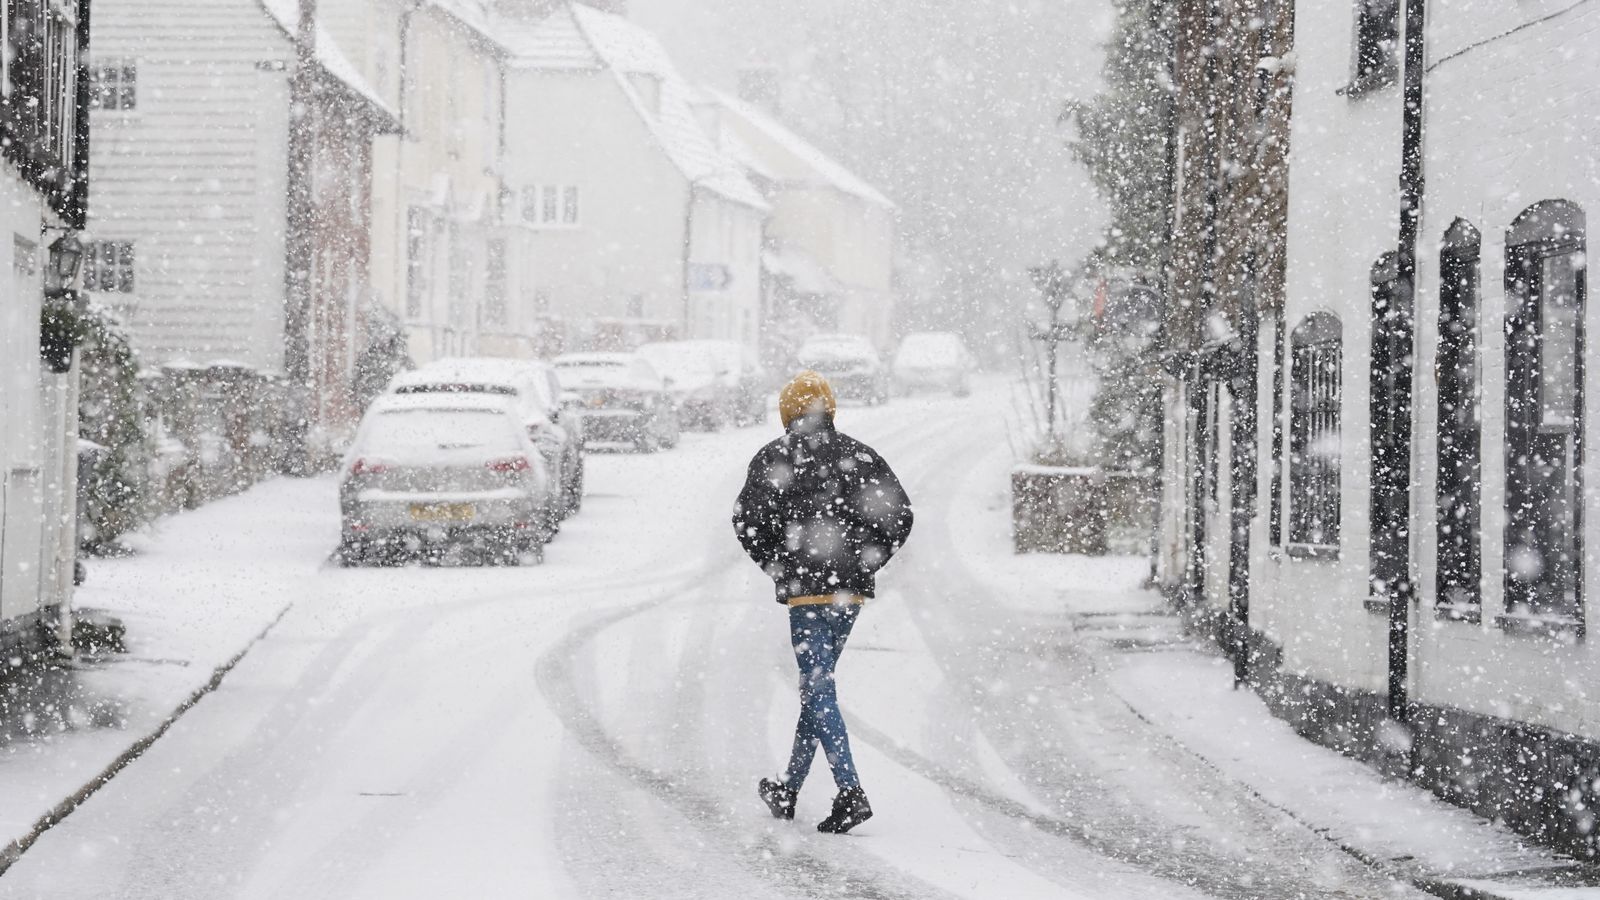 UK weather: Britain braces for freezing temperatures and up to 5cm of snow